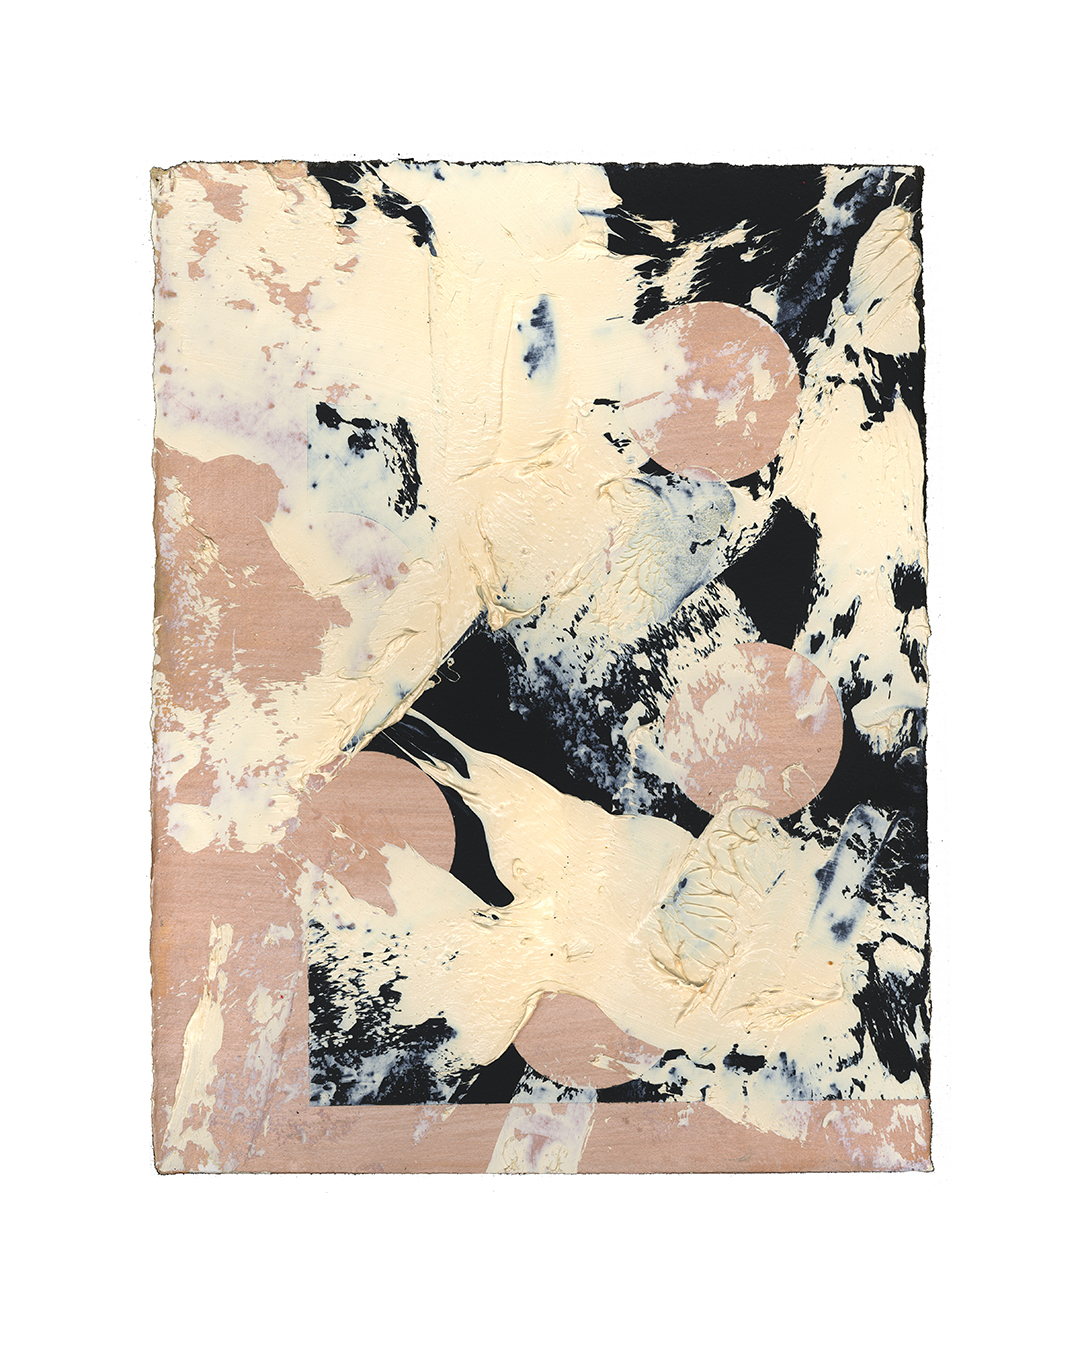 Piet Dieleman, untitled, 2020, painting, oil, tempera paint on paper, 380 x 290 mm, €930